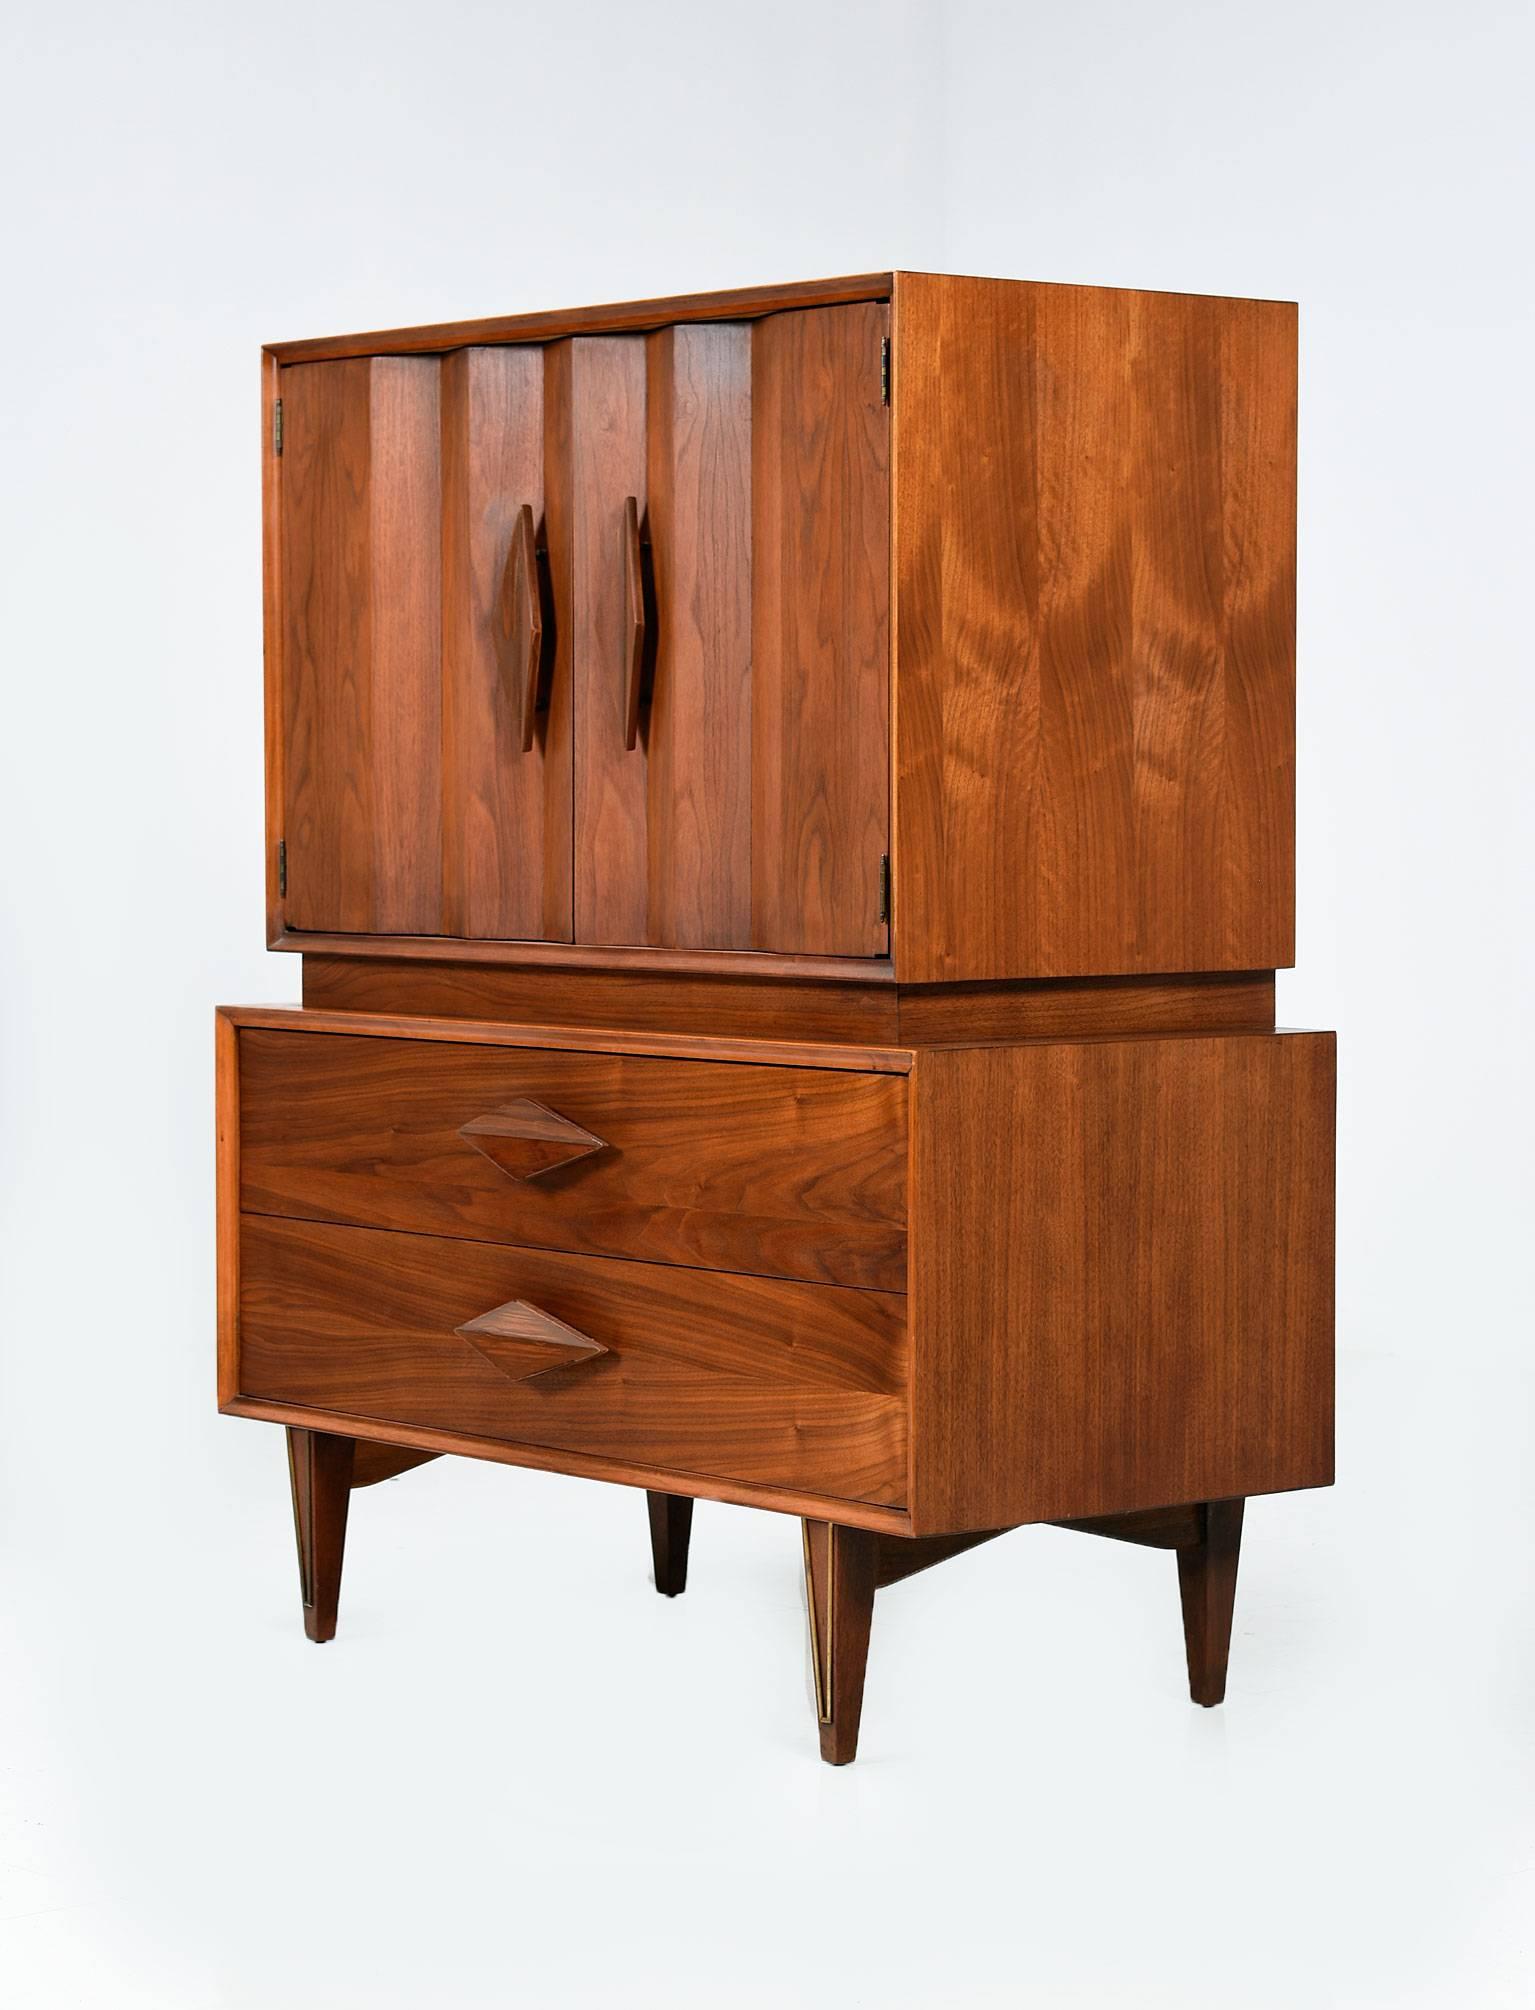 Mid-Century Modern American made walnut Gentlemans Dresser Highboy. This stunning walnut dresser features sculpted diamond shaped drawer pulls and brass detailing along the front of the legs. The top cabinet opens up to reveal three drawers which